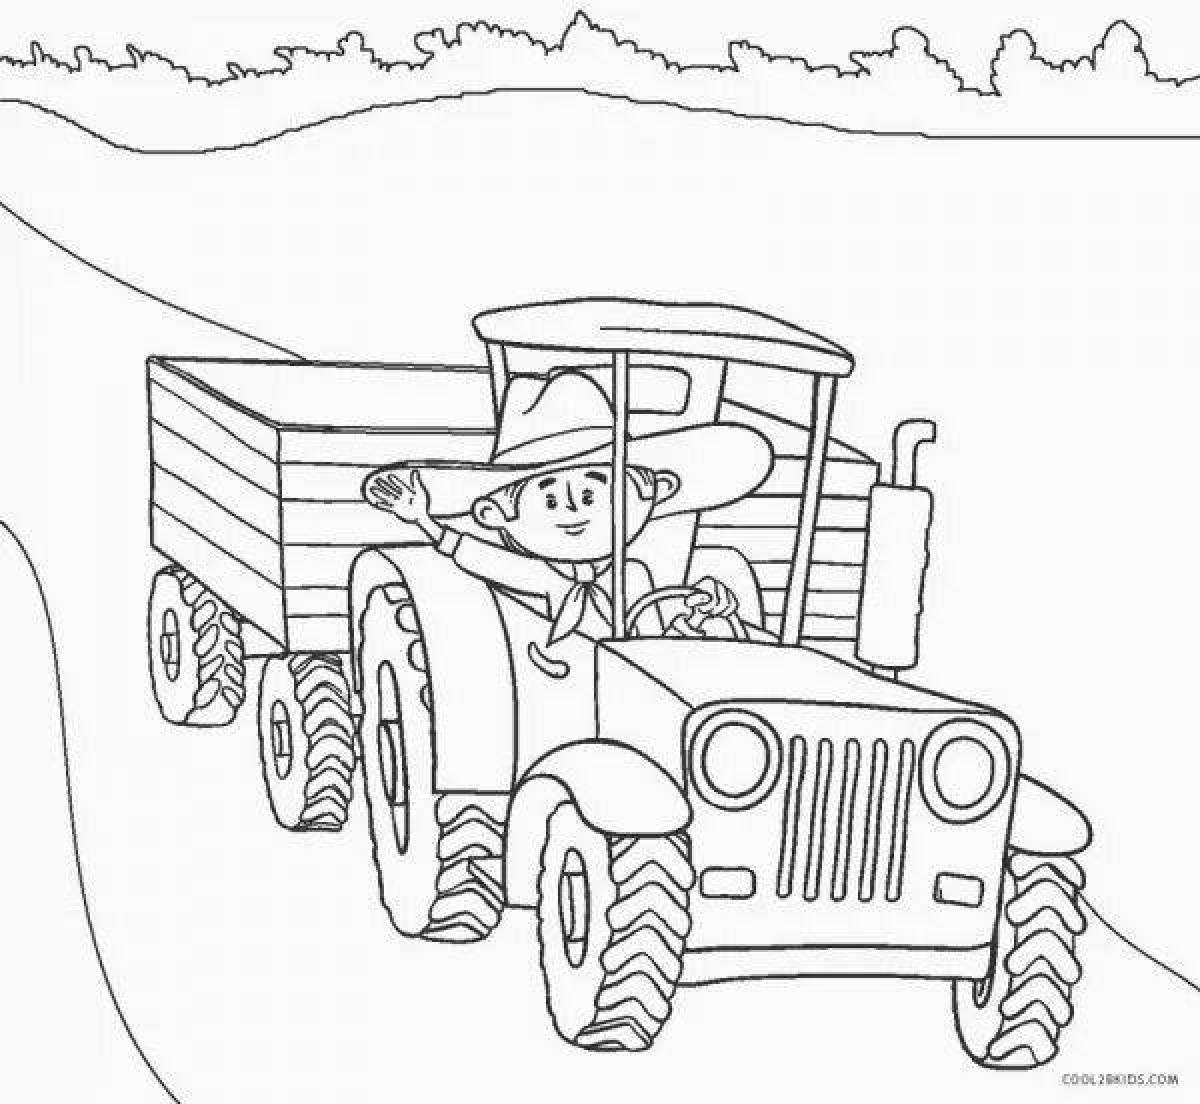 Coloring page charming tractor driver